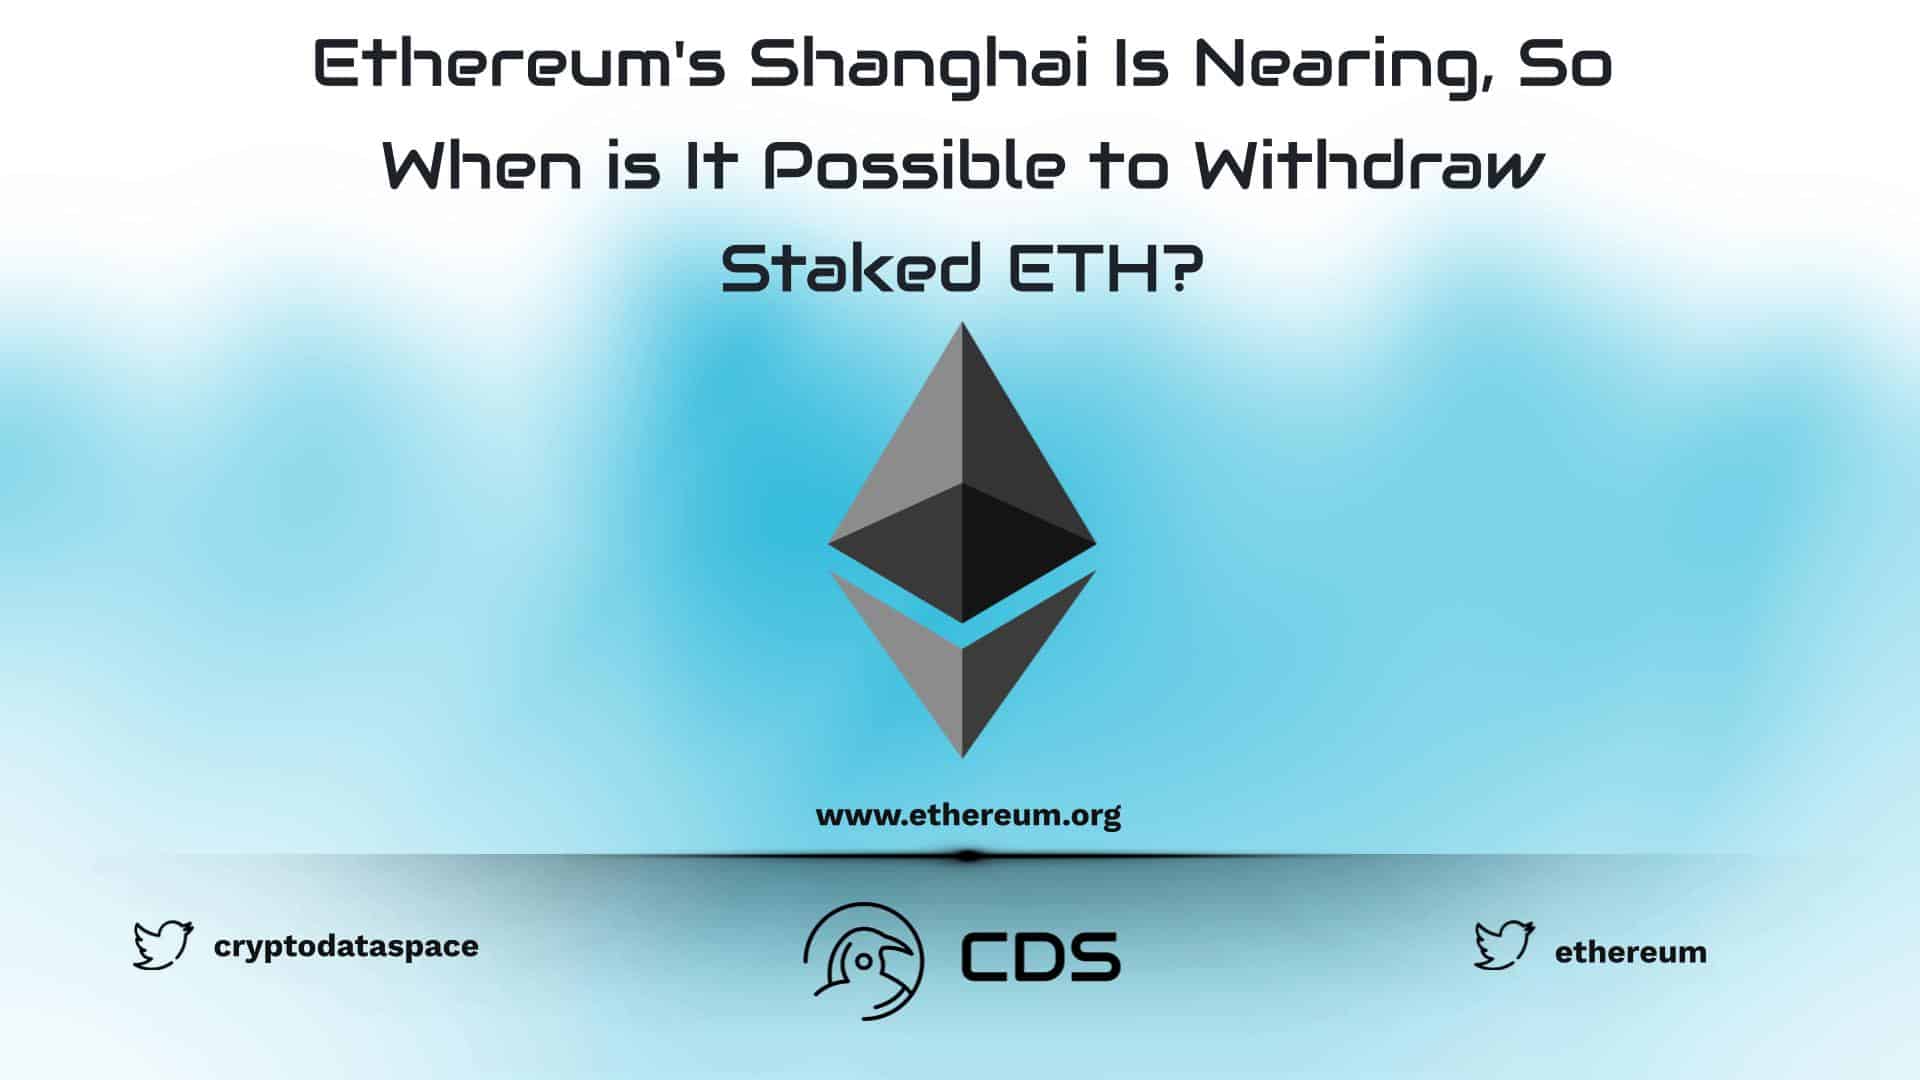 Ethereum's Shanghai Is Nearing, So When is It Possible to Withdraw Staked ETH?